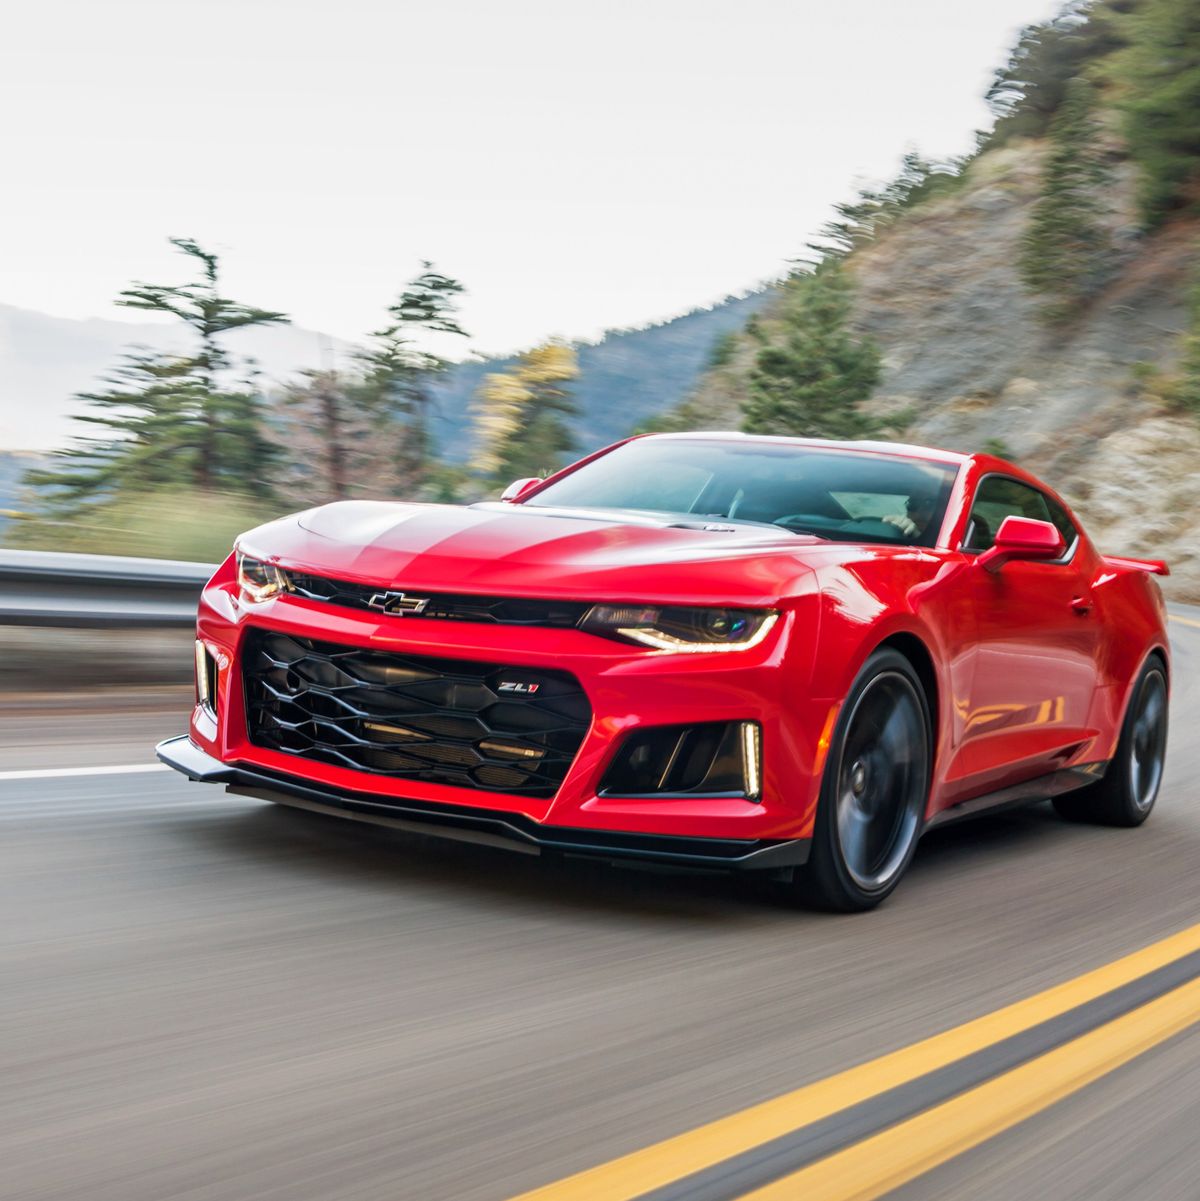 It's the End of Chevrolet's Camaro as We Know It